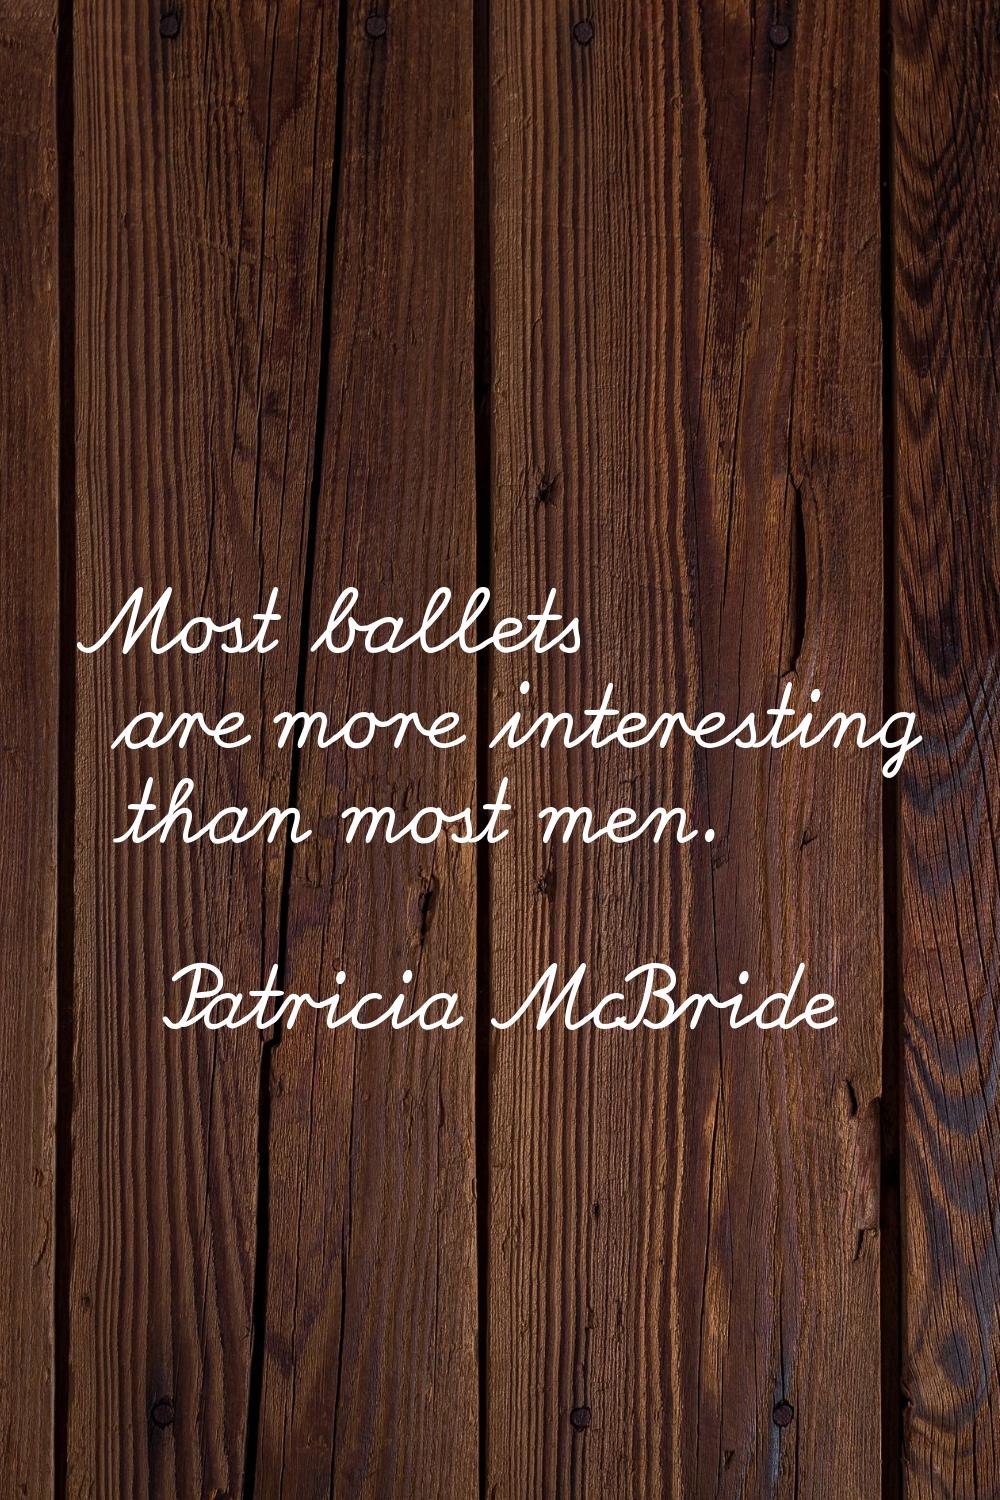 Most ballets are more interesting than most men.